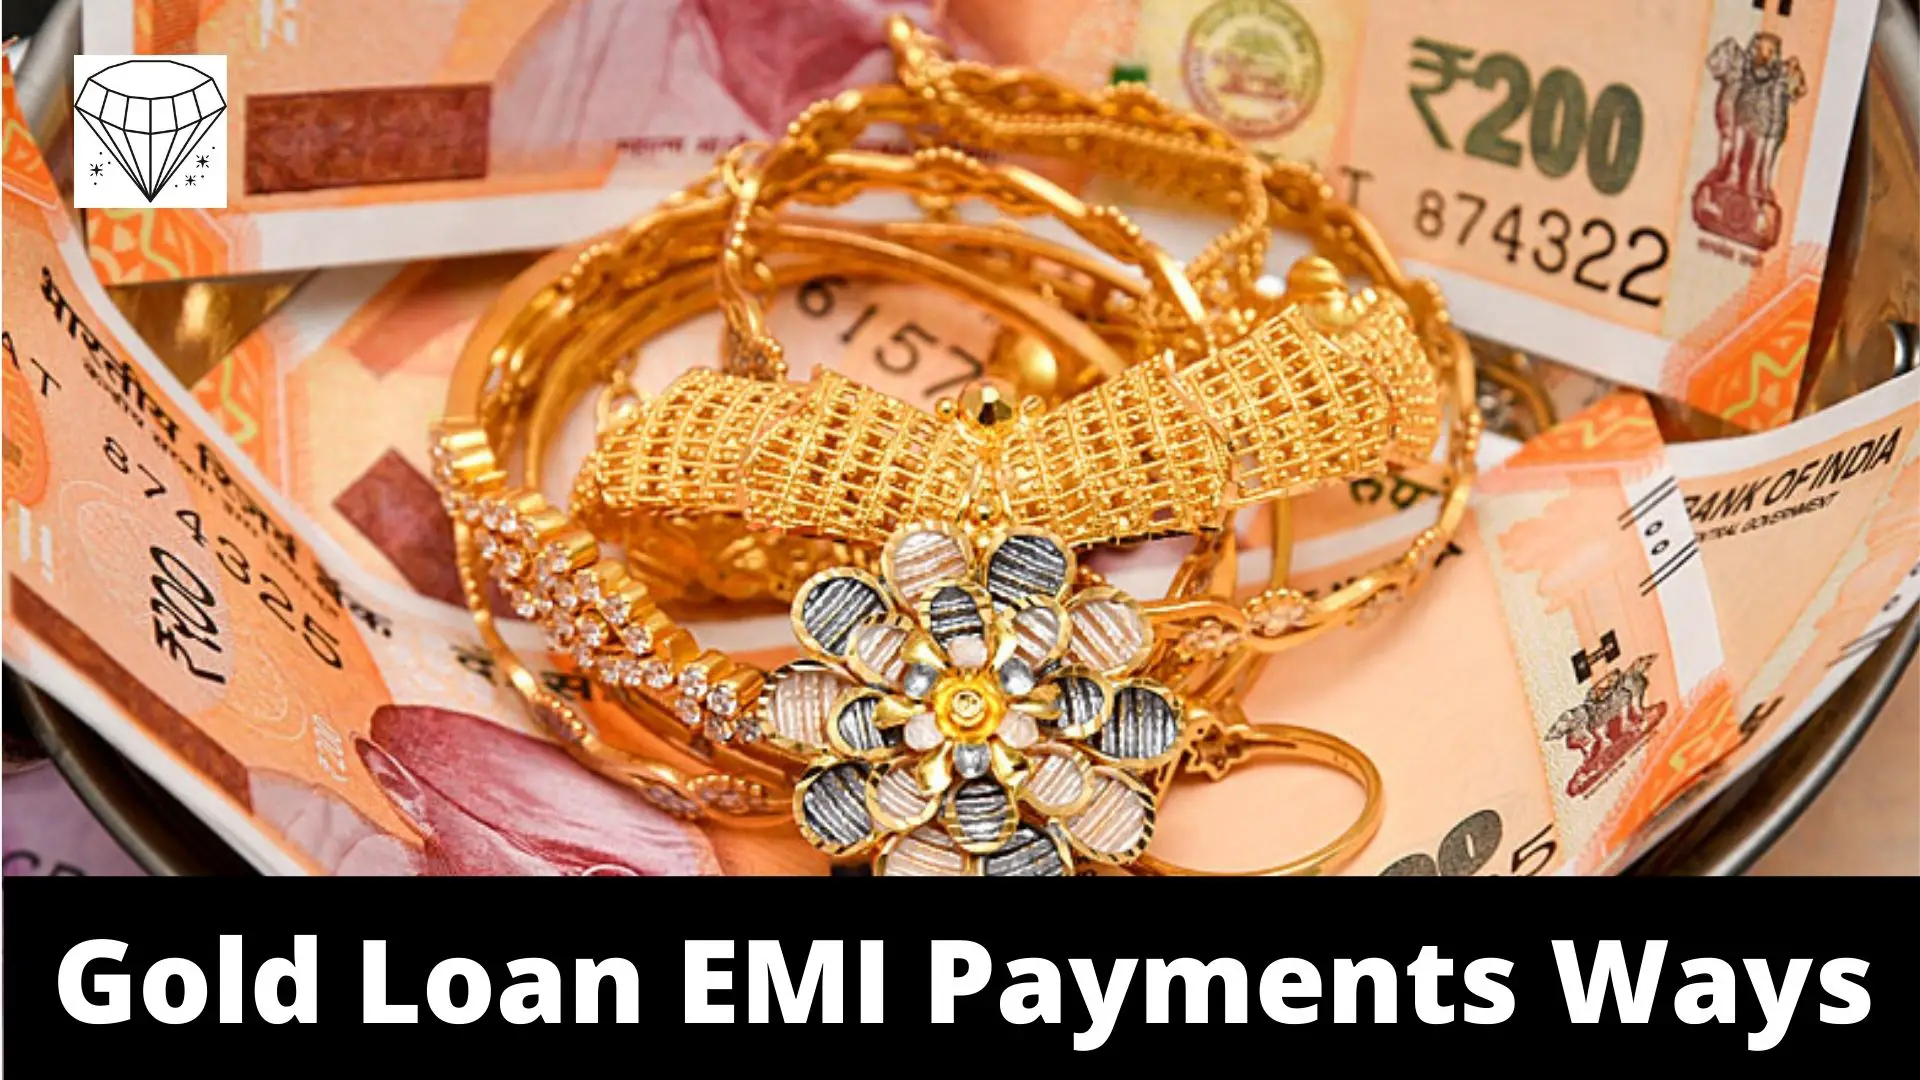 Gold Loan EMI Payments Ways